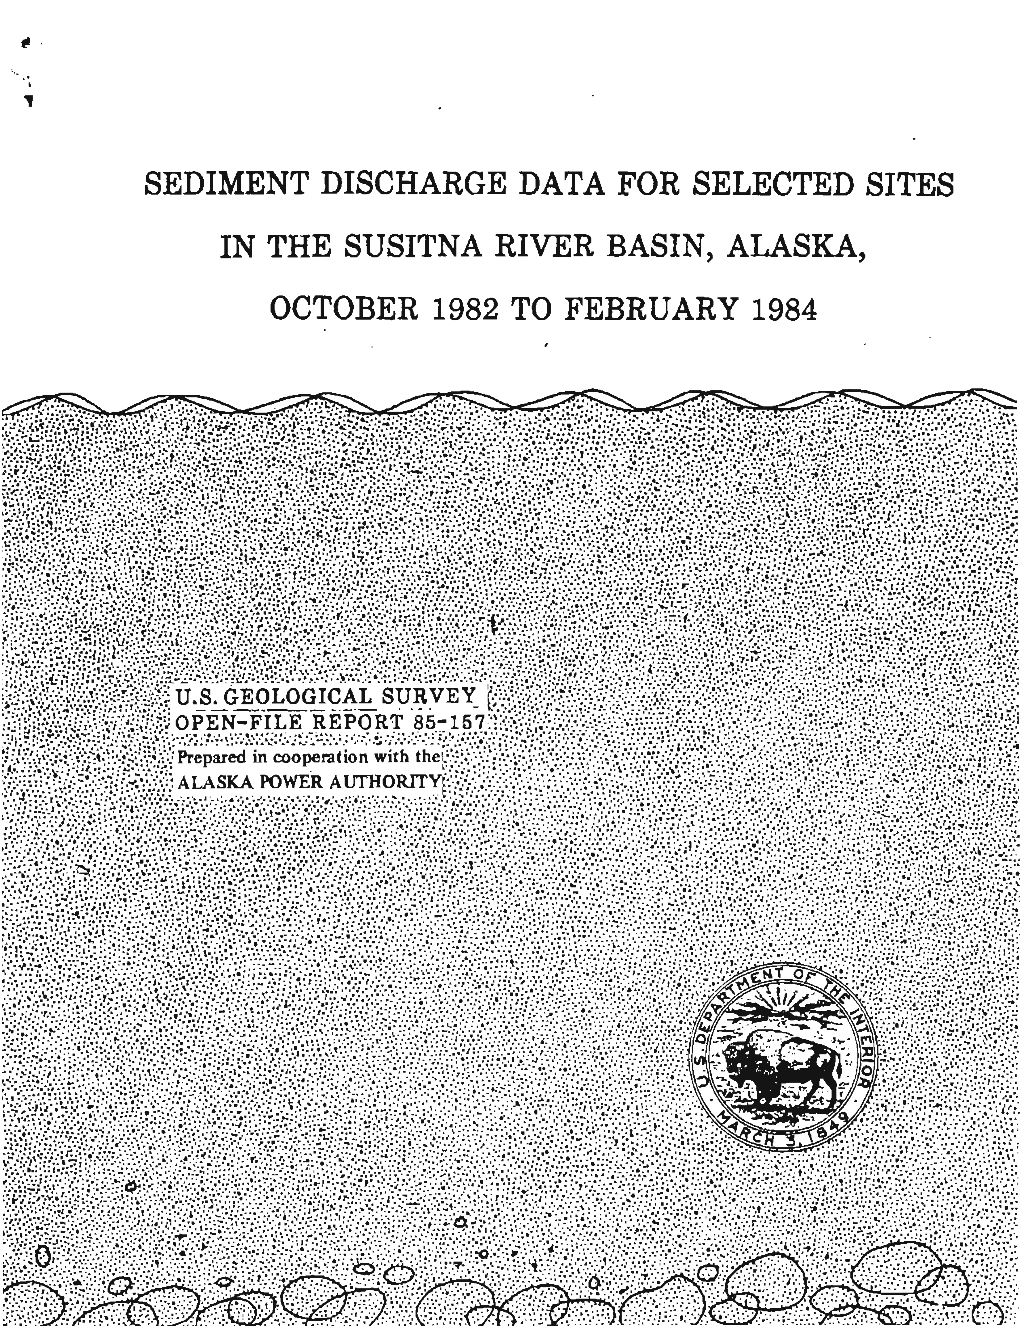 Sediment Discharge Data for Selected Sites October 1982